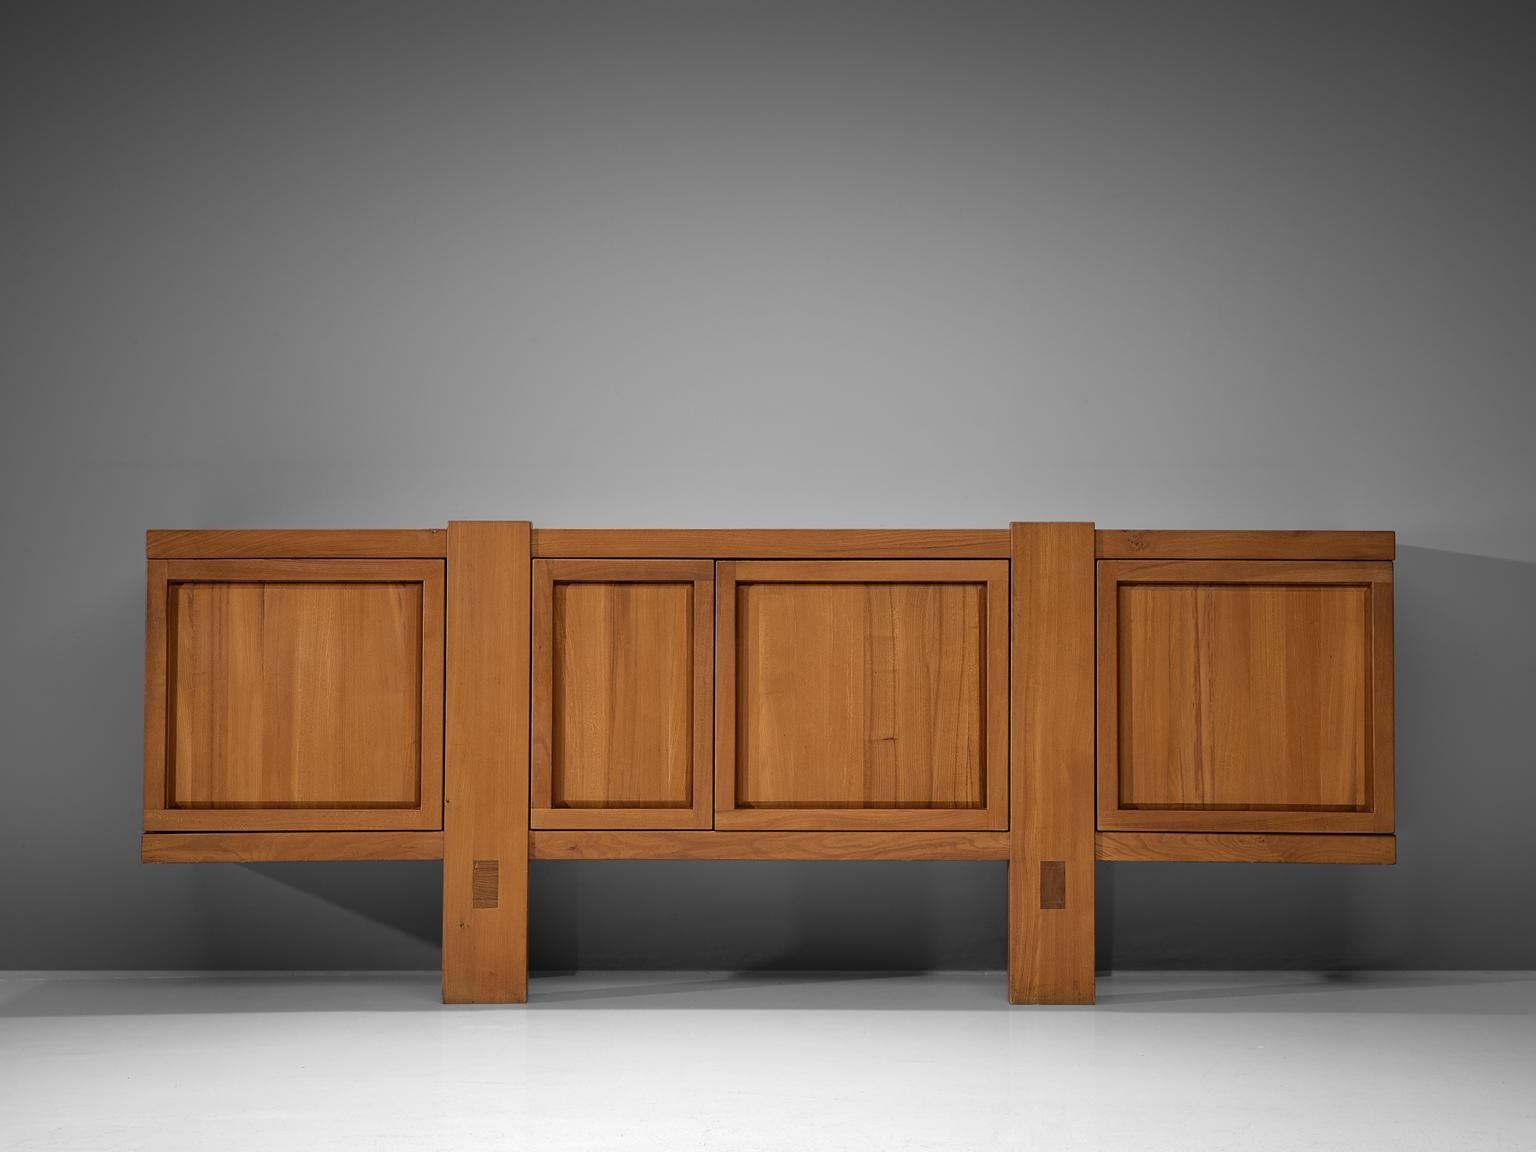 Pierre Chapo, sideboard model R16, elm wood, France, late 1960s.

This exquisitely crafted credenza combines a simplified yet complex design combined with nifty, solid construction details that characterize Chapo's work. Chapo responded to a